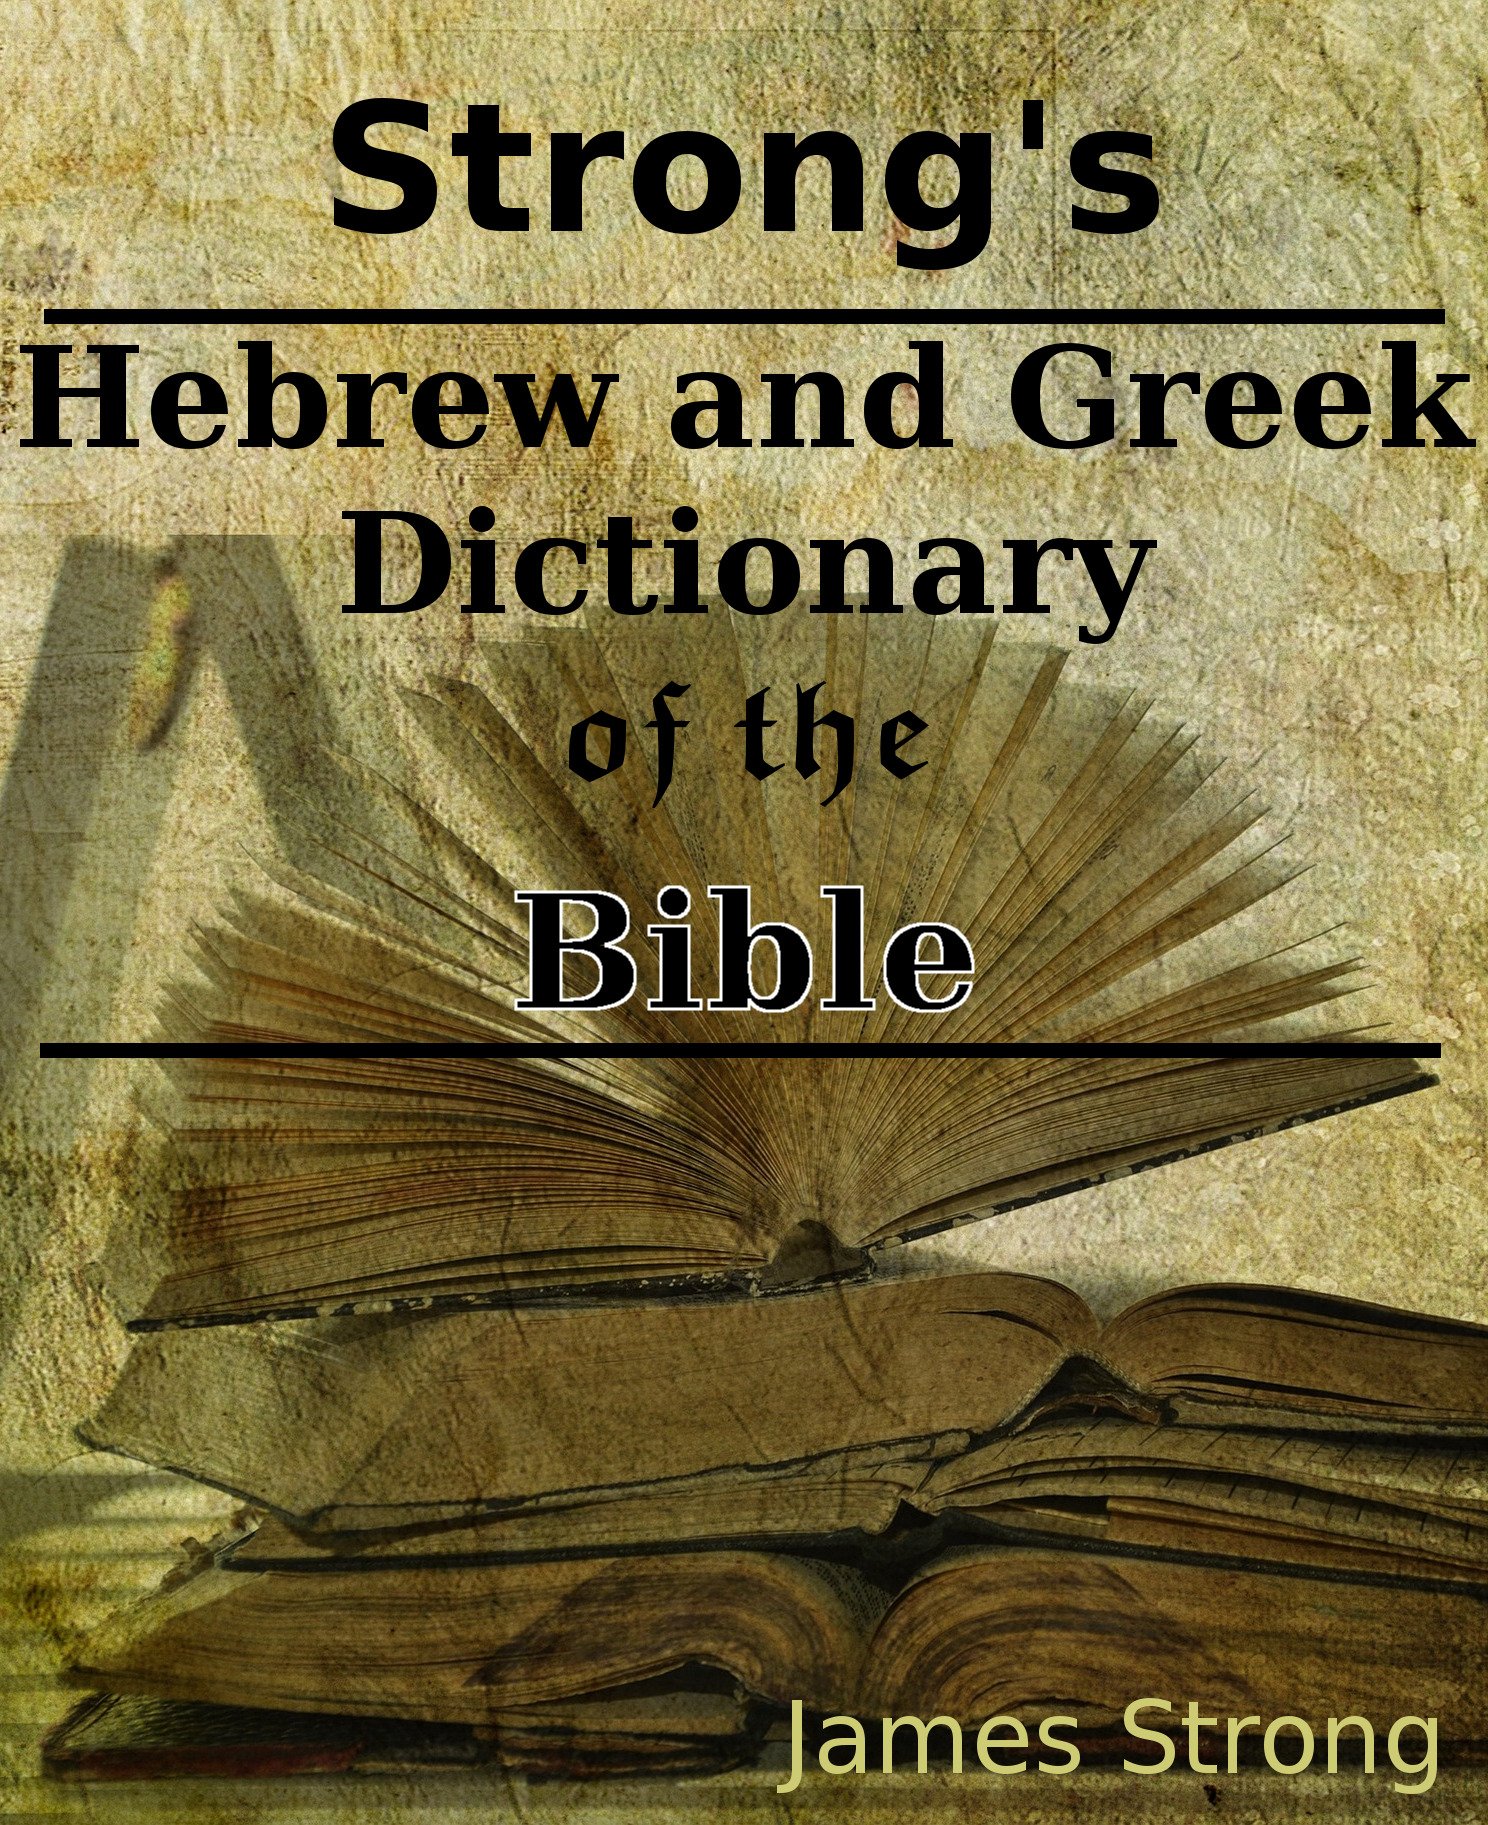 Strong's Greek and Hebrew Dictionary of the Bible